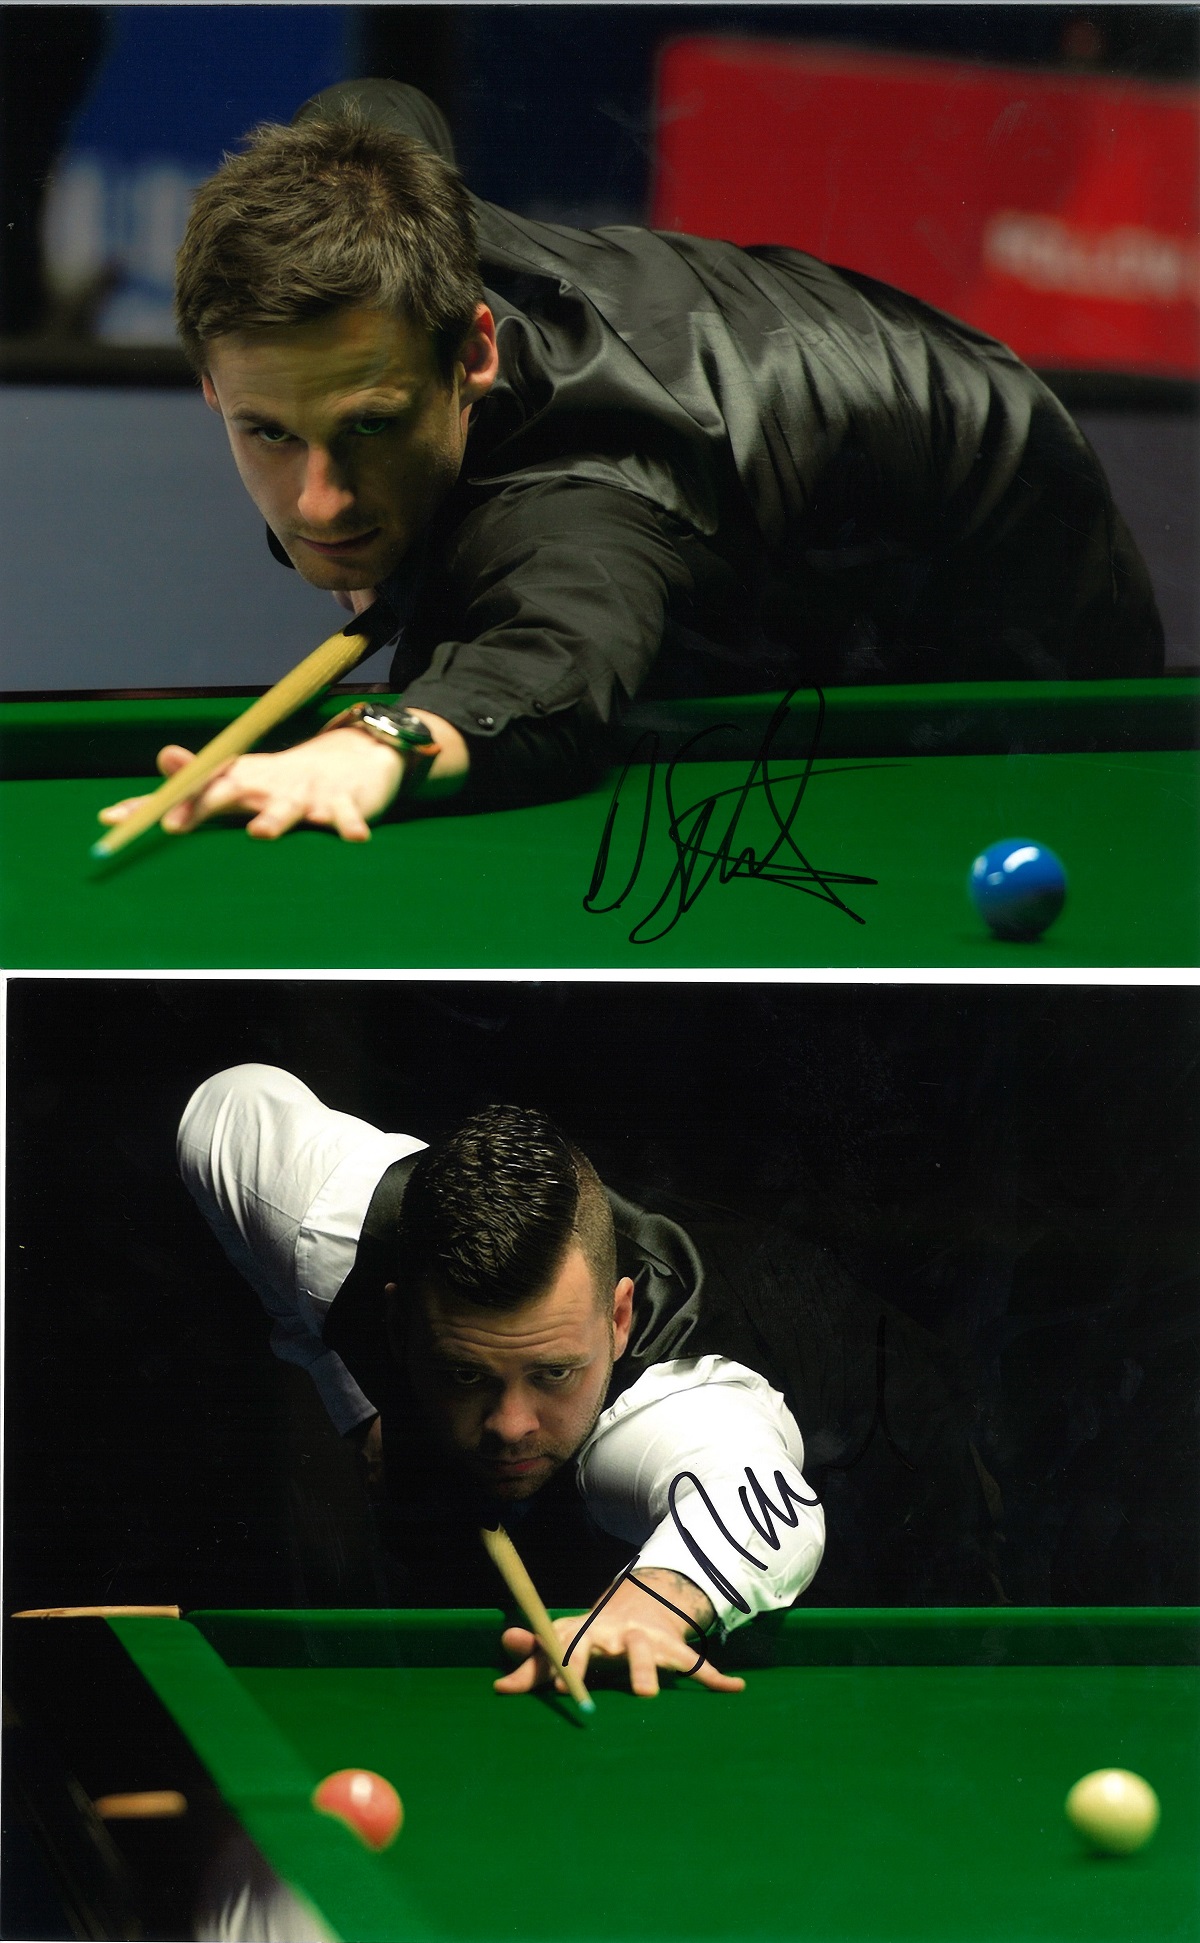 Snooker collection 5, 10x8 signed colour photos by players such as Mark Allen, Dave Gilbert, Jack - Image 2 of 3